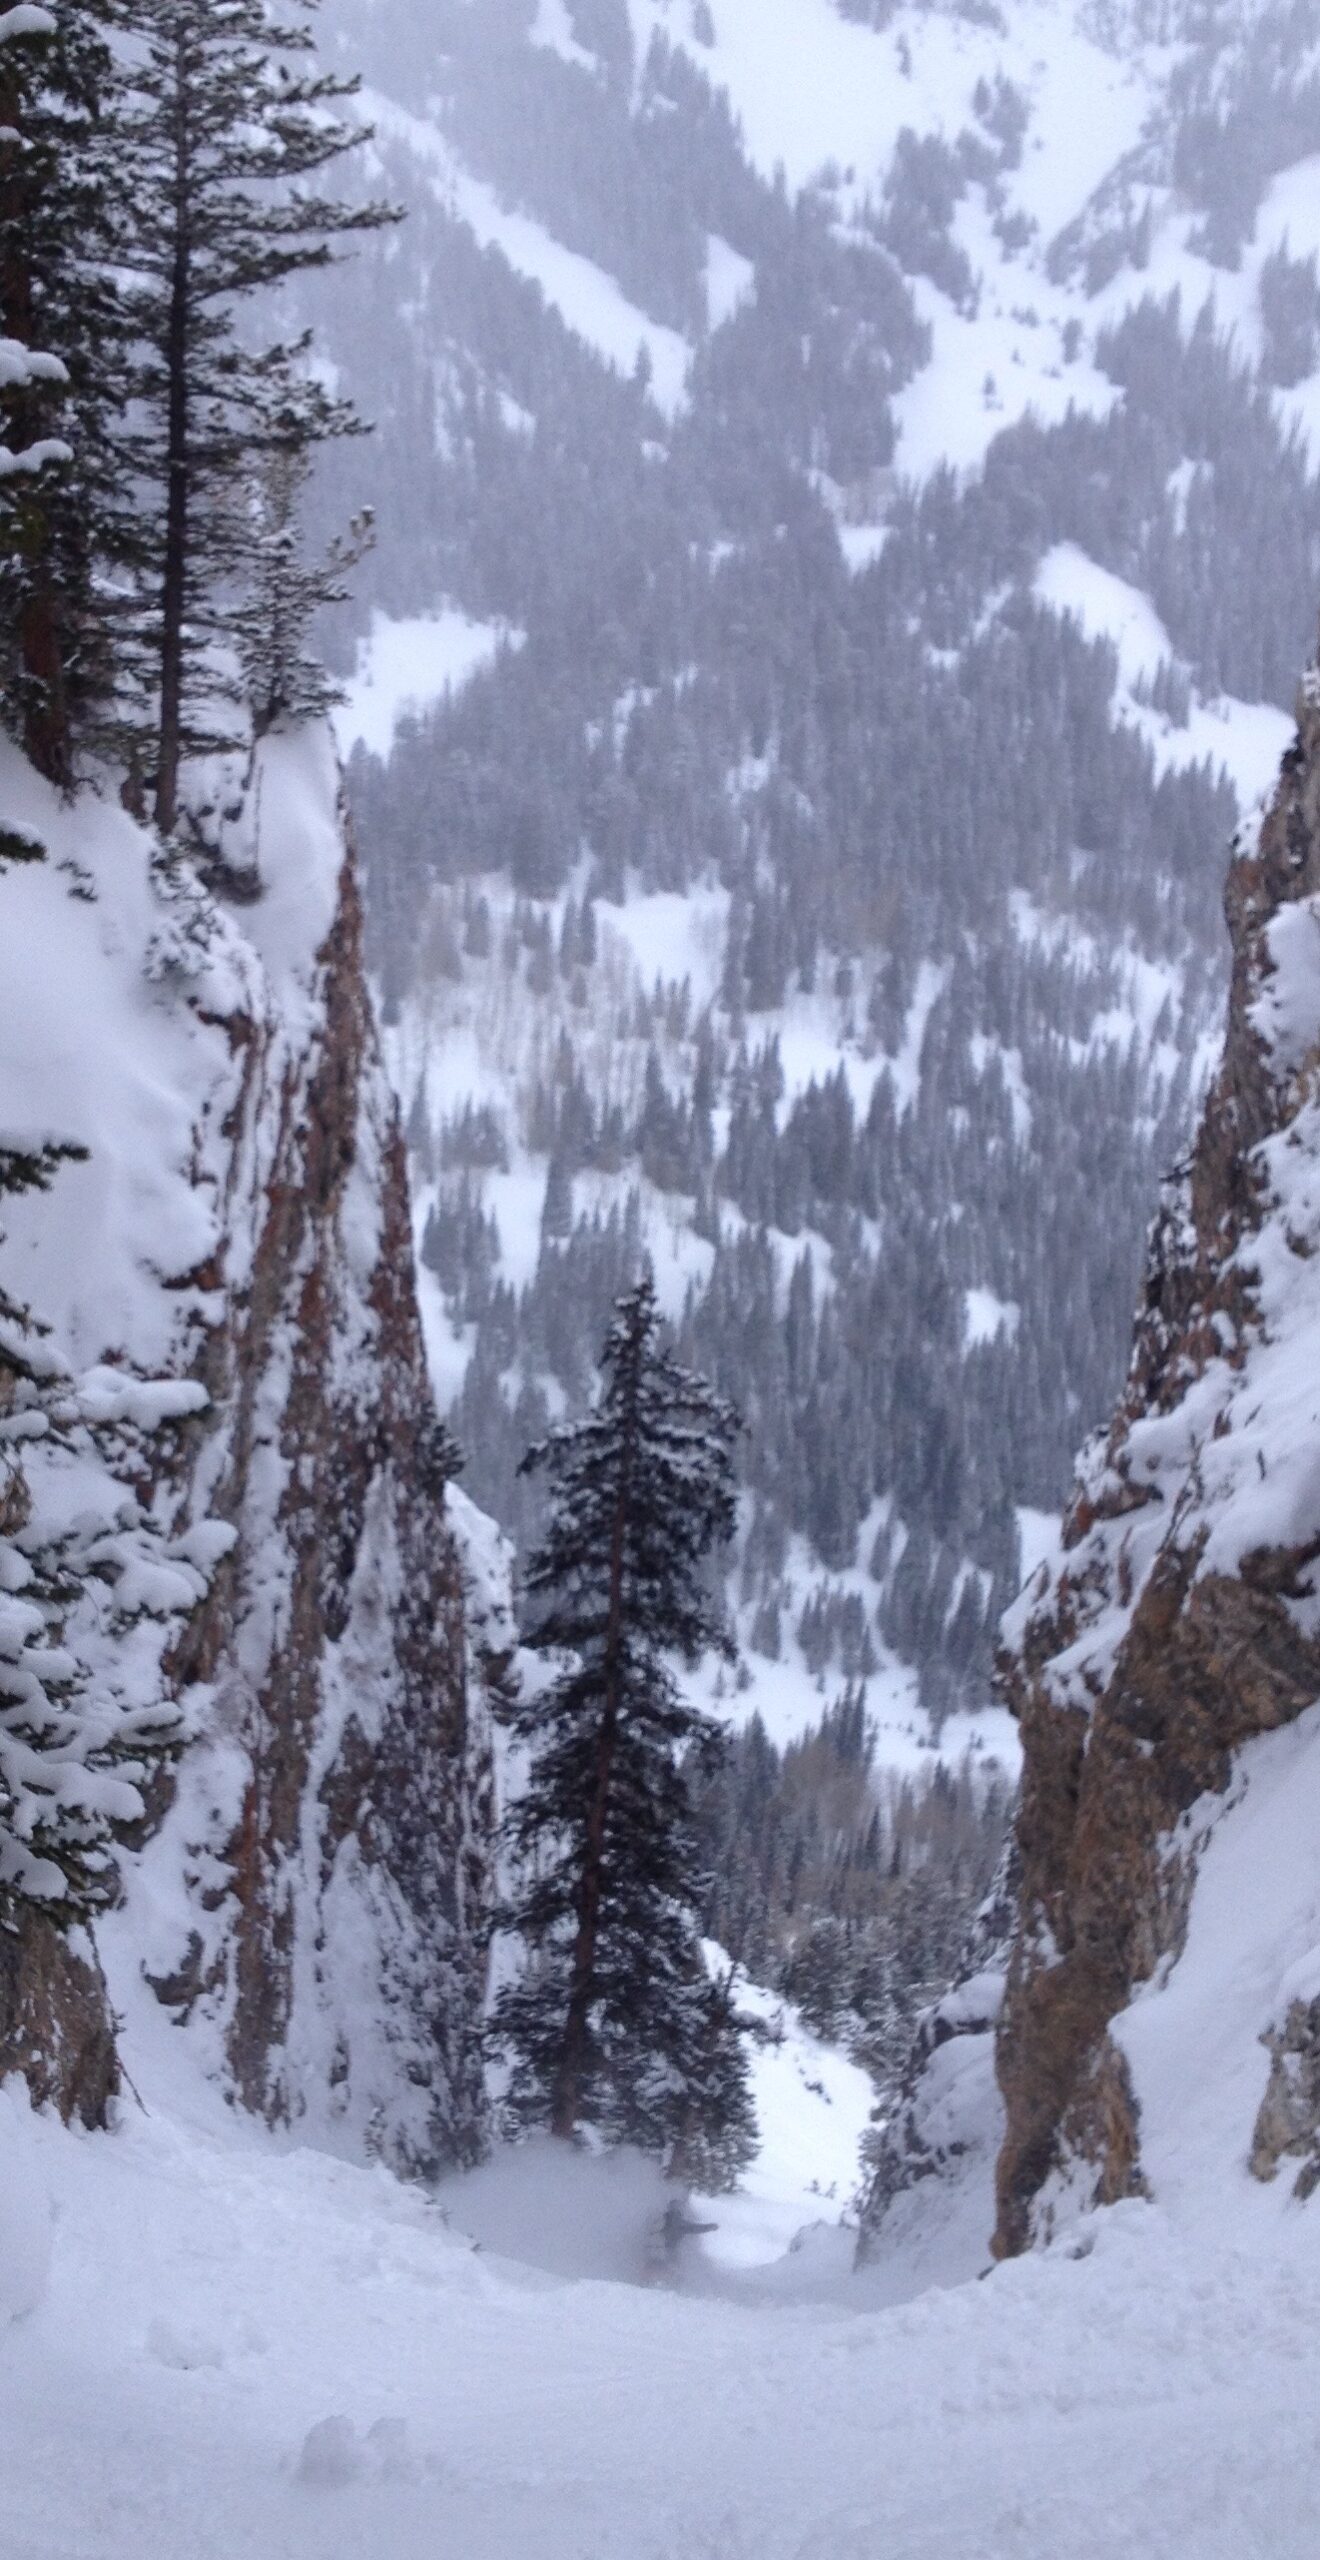 Snowboarding down the Benson and Hedges couloir in the Wasatch Backcountry of Utah